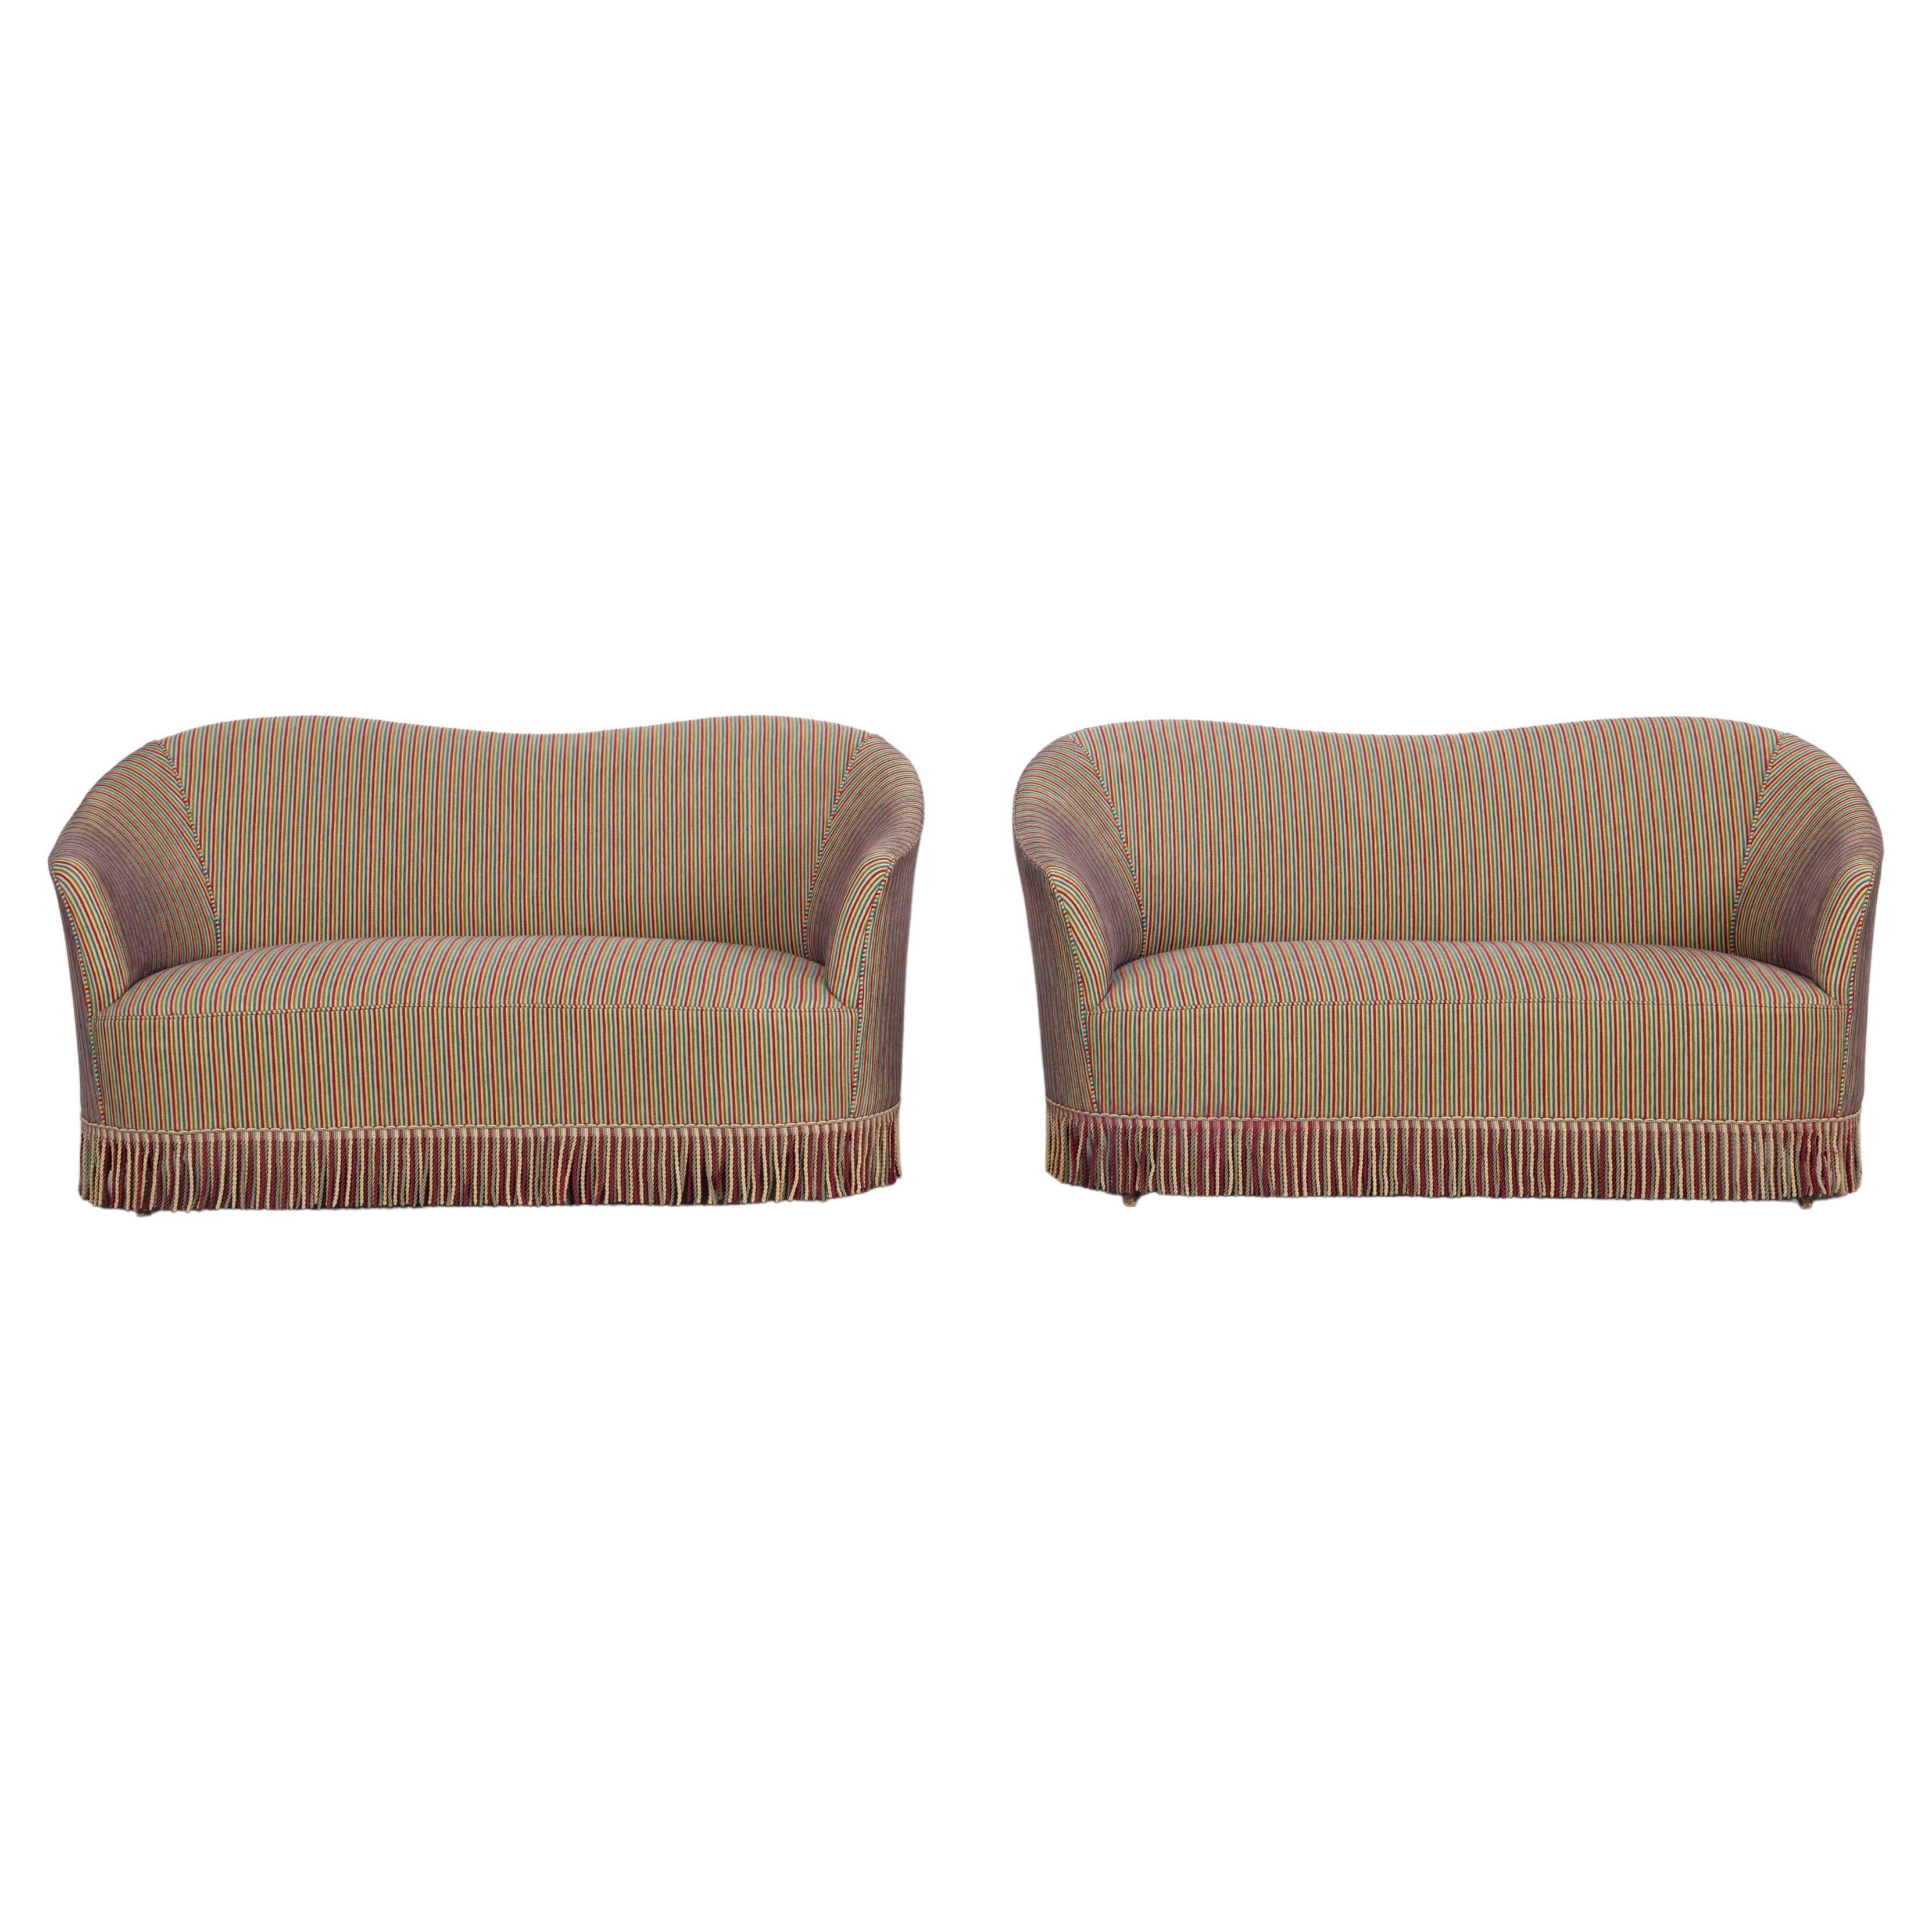 Set of 2 Sofas with Fabric by Fede Cheti, Italy 1940s